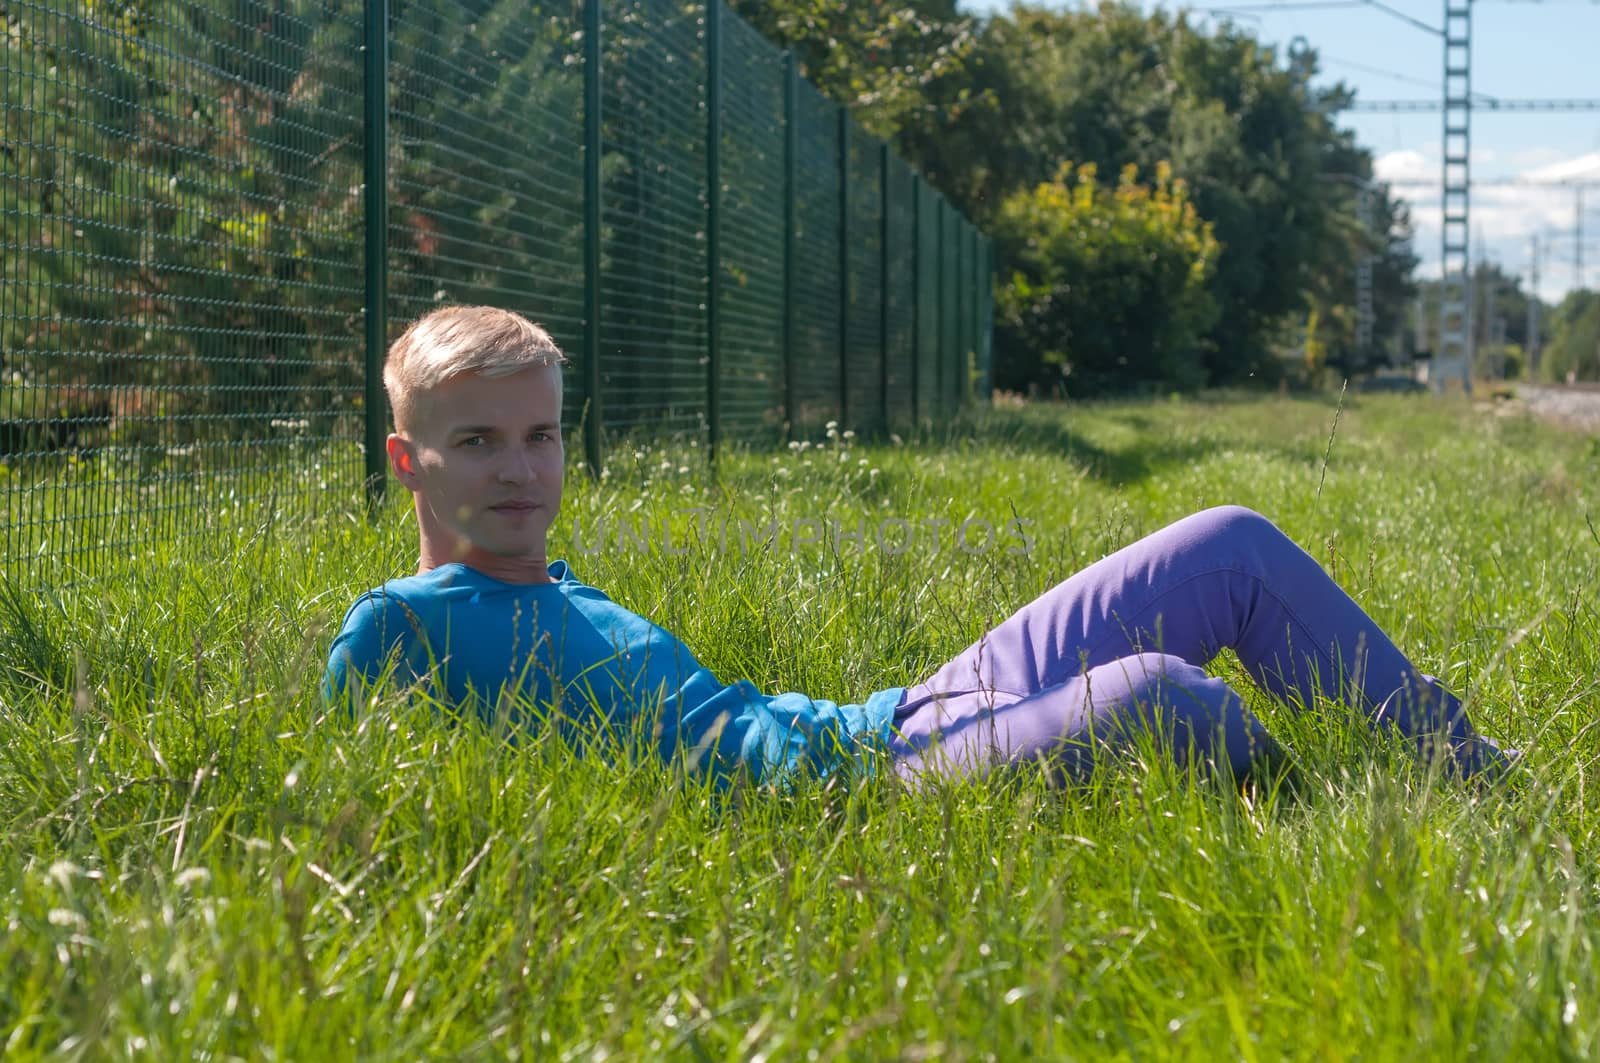 Young an in blue t-shirt lying in a grass